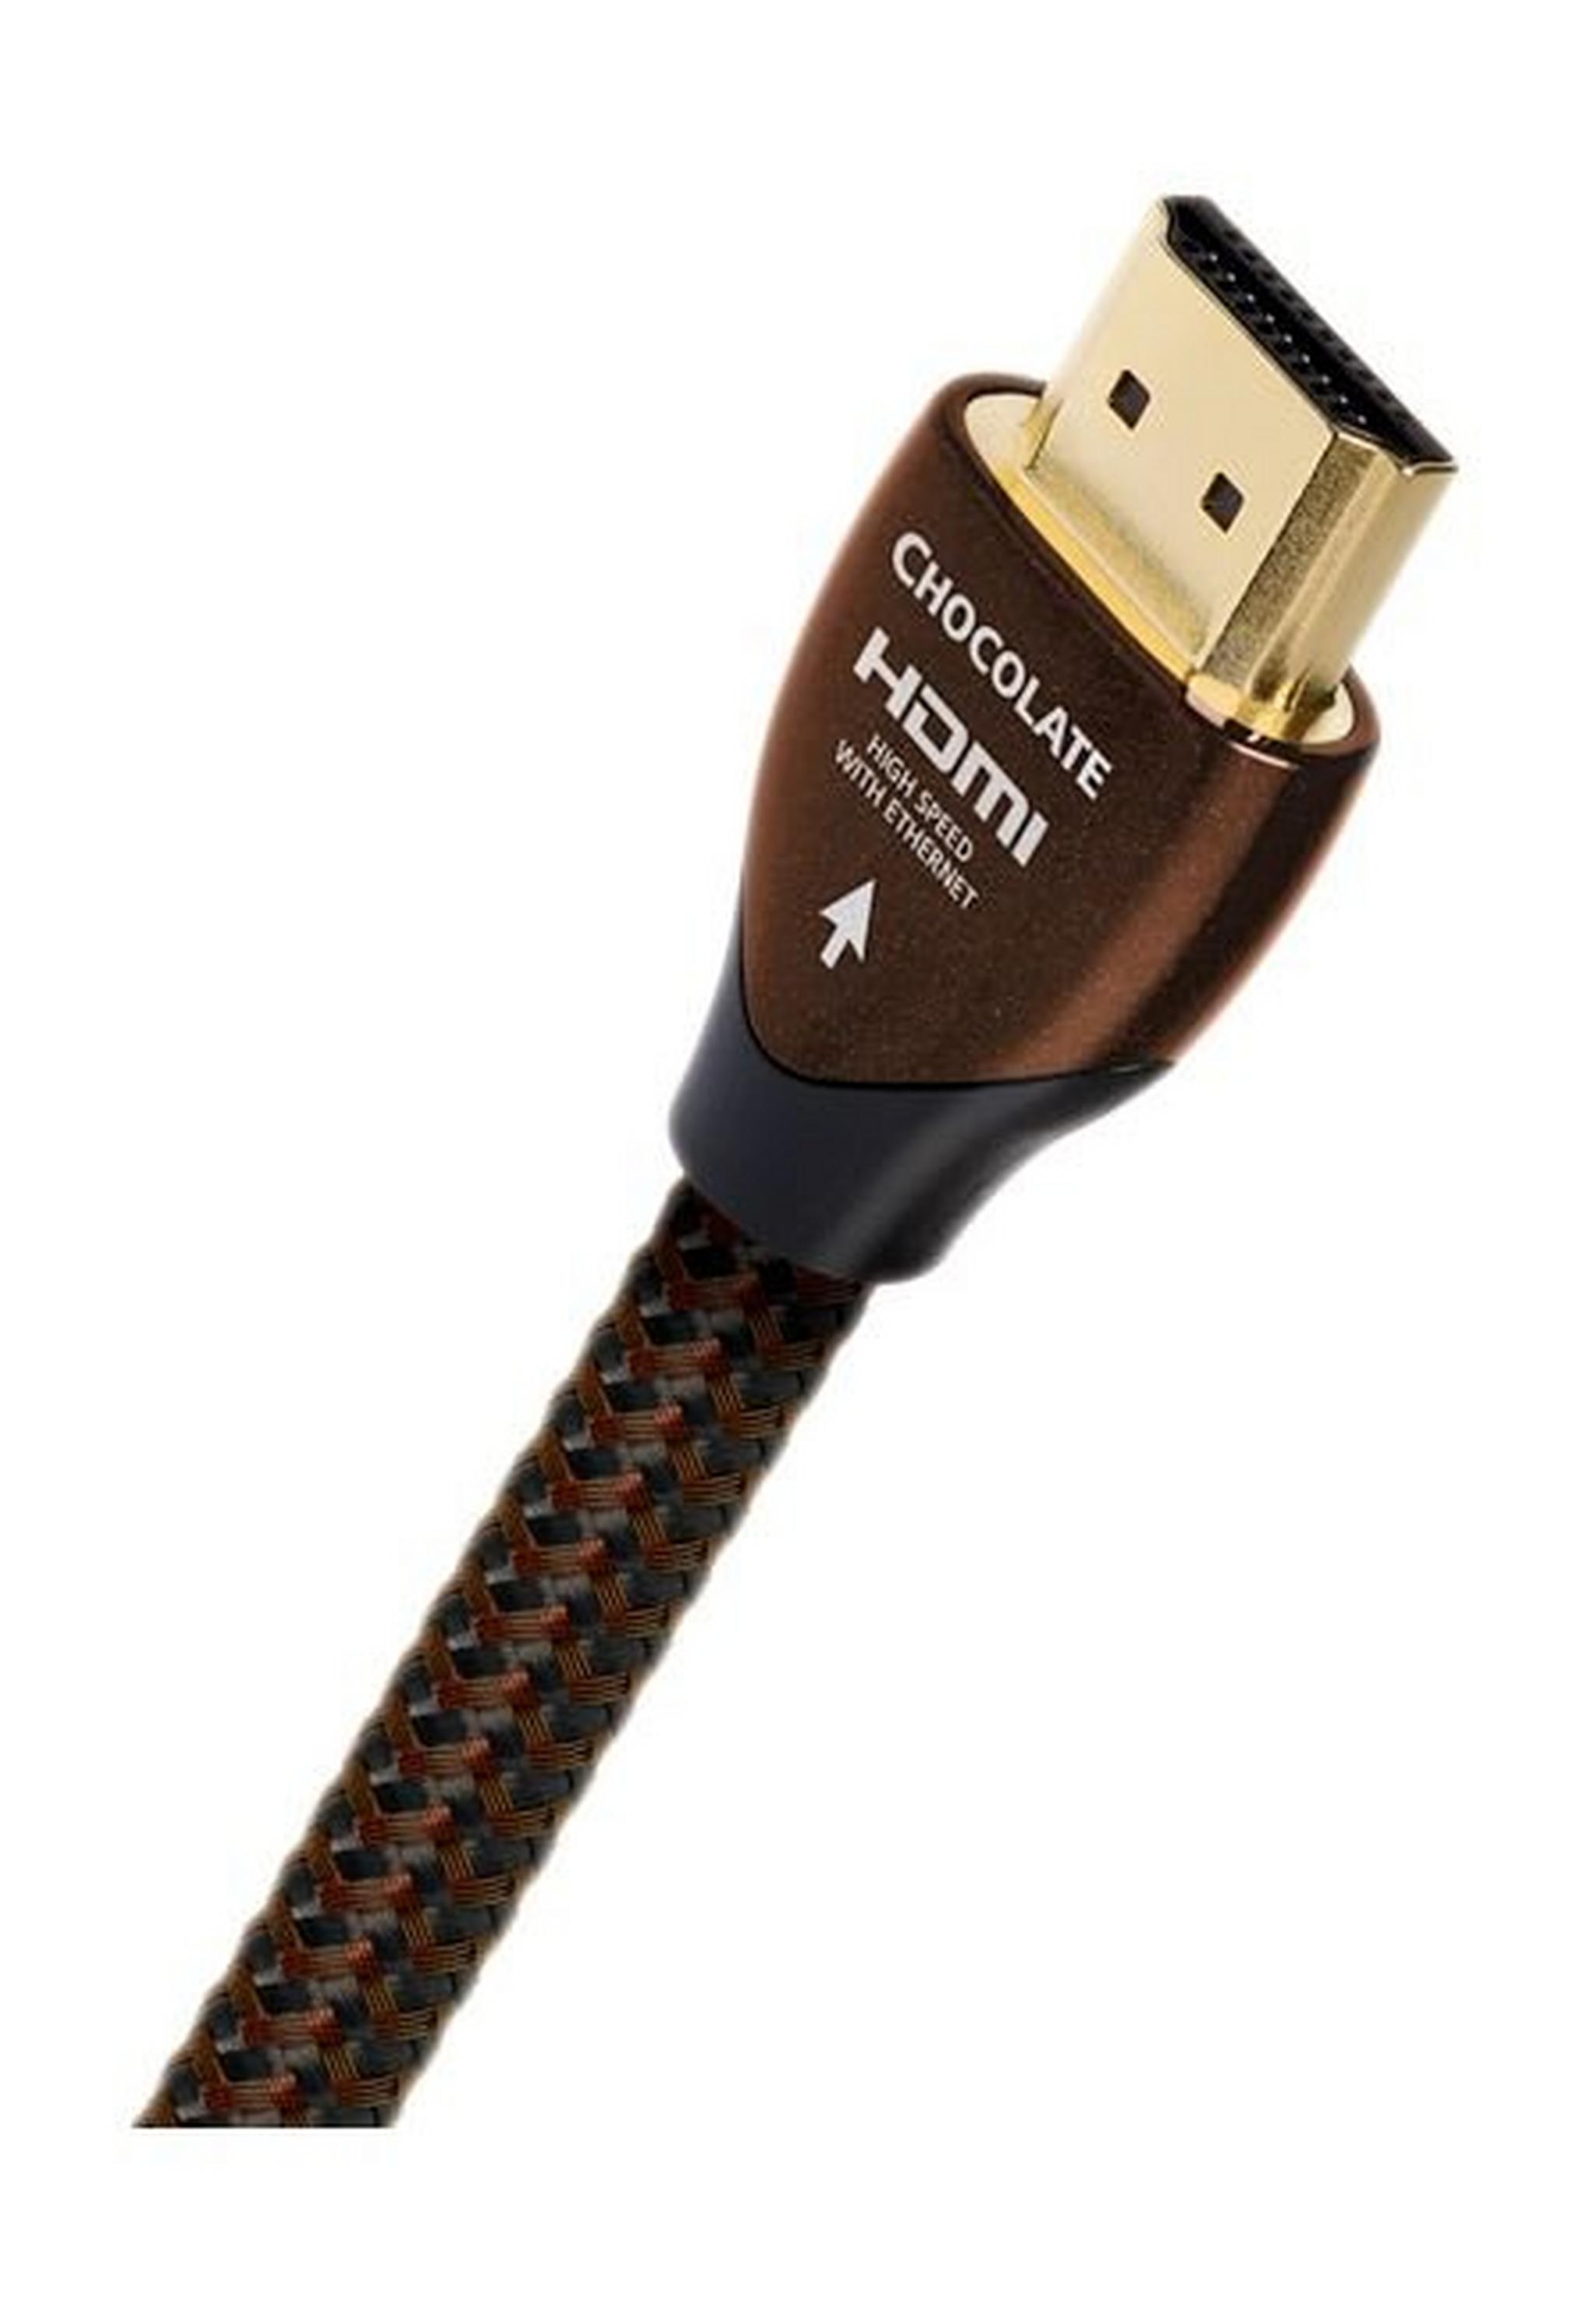 Audioquest Chocolate HDMI Cable 1.5m - Brown